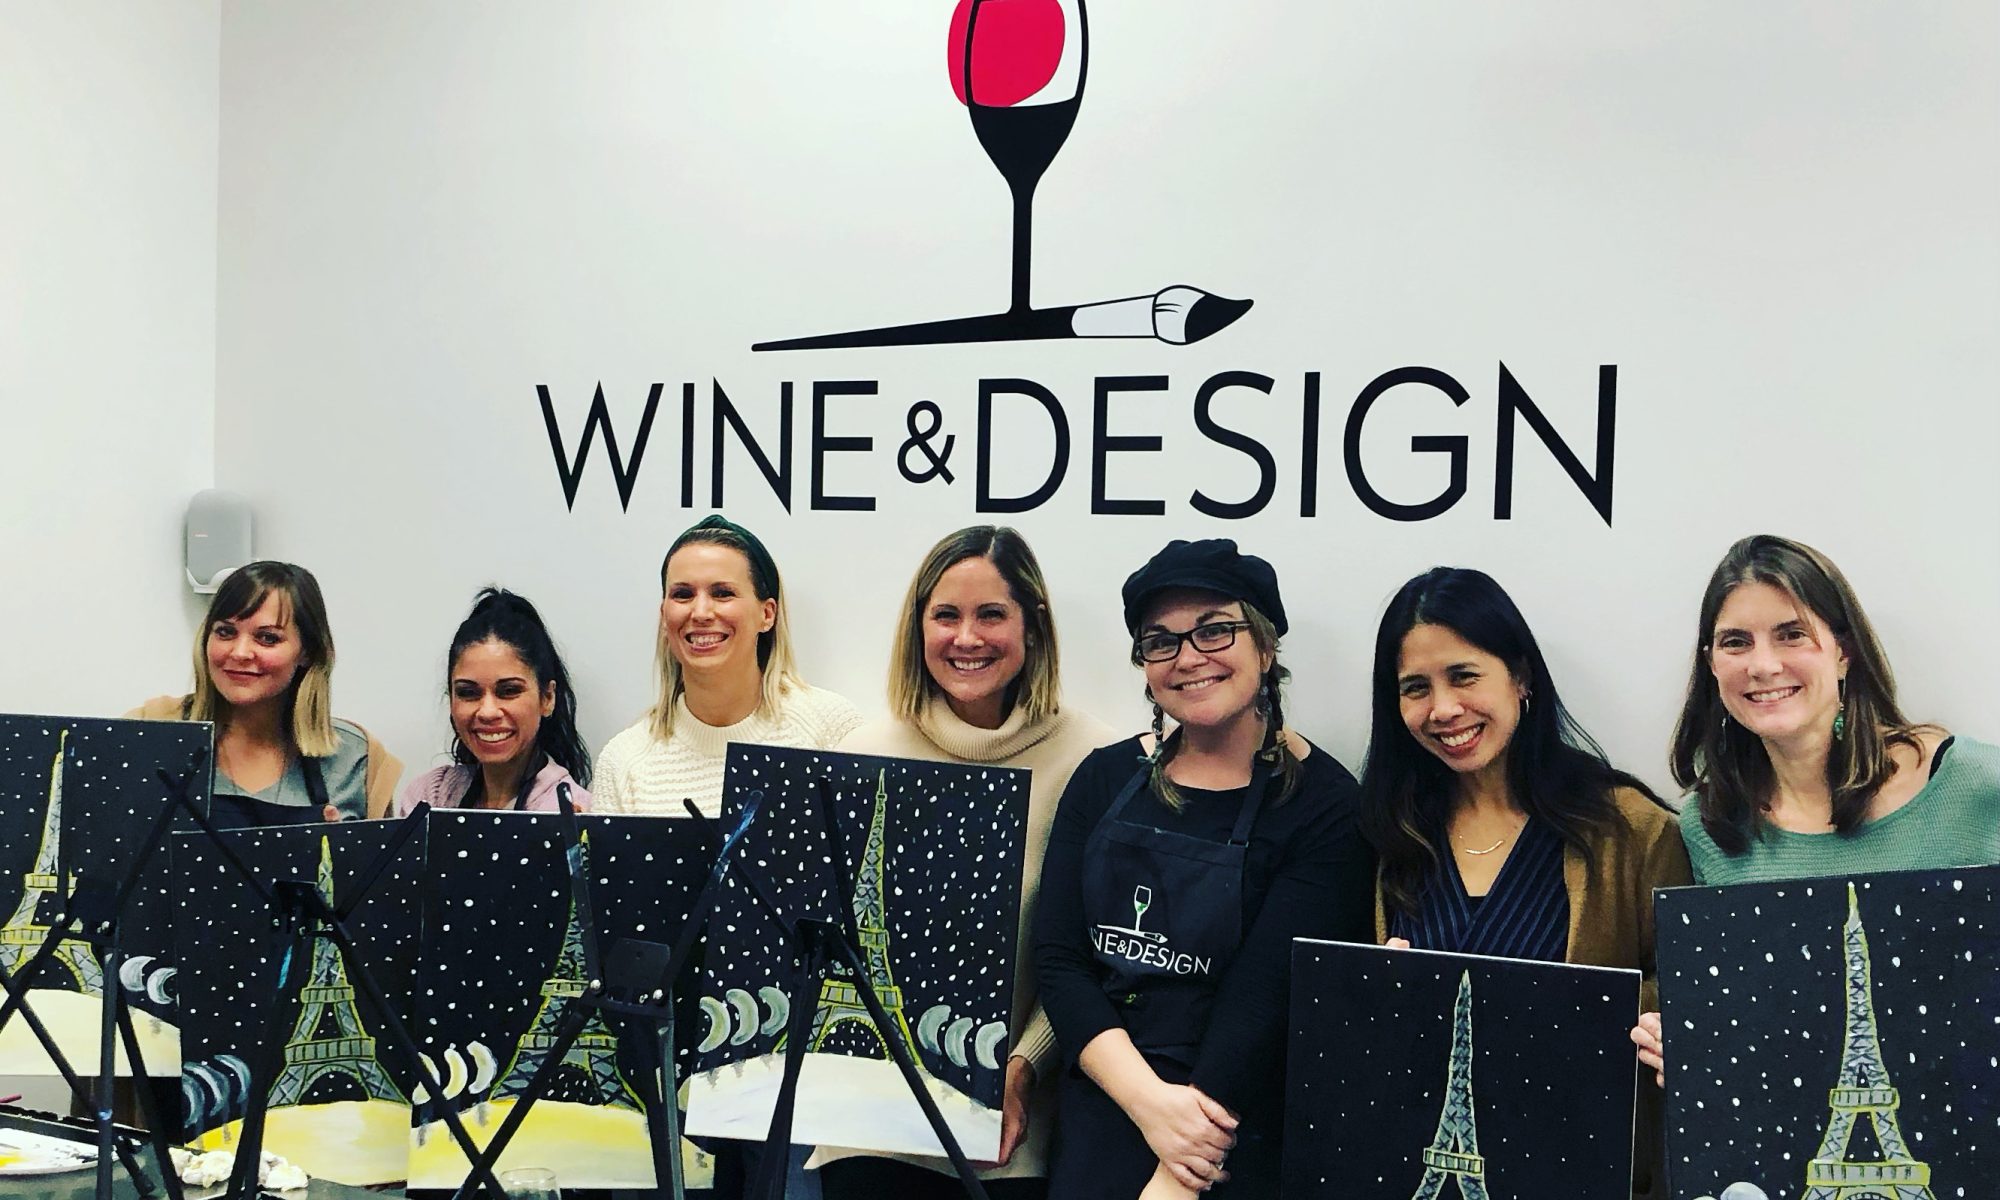 Moms night out is enjoyed at Wine & Design Montclair with these amazing mothers from Verona!